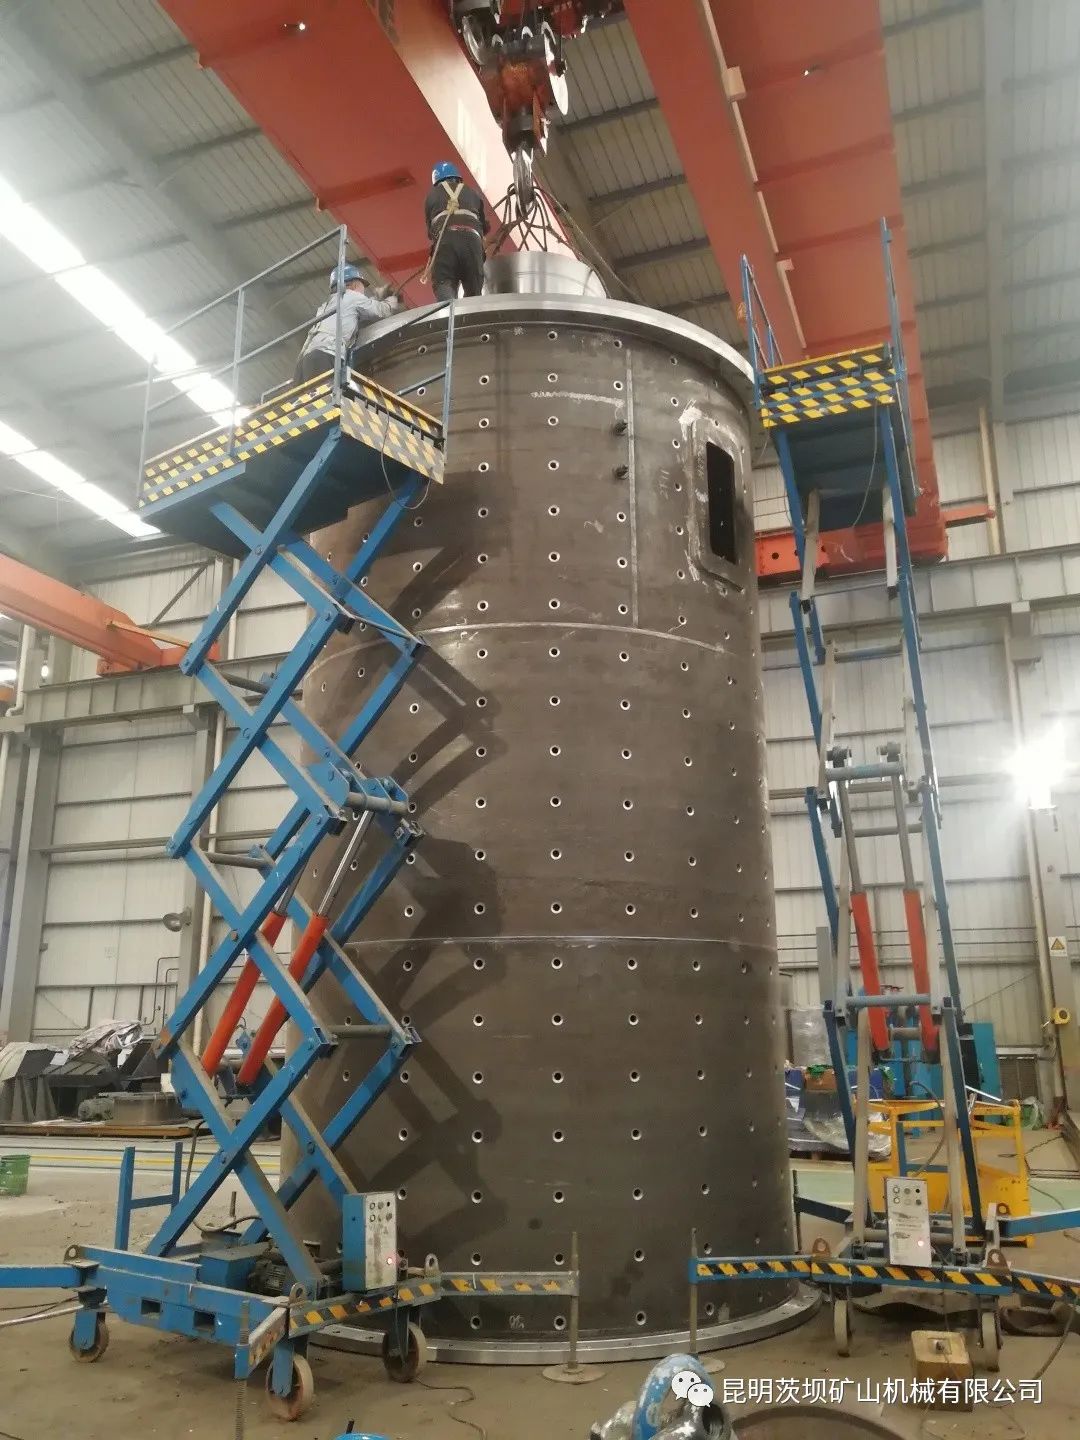 MQG-3600X6000 Ball Mill Successfully Enters the Site for Installation Company news 第4张